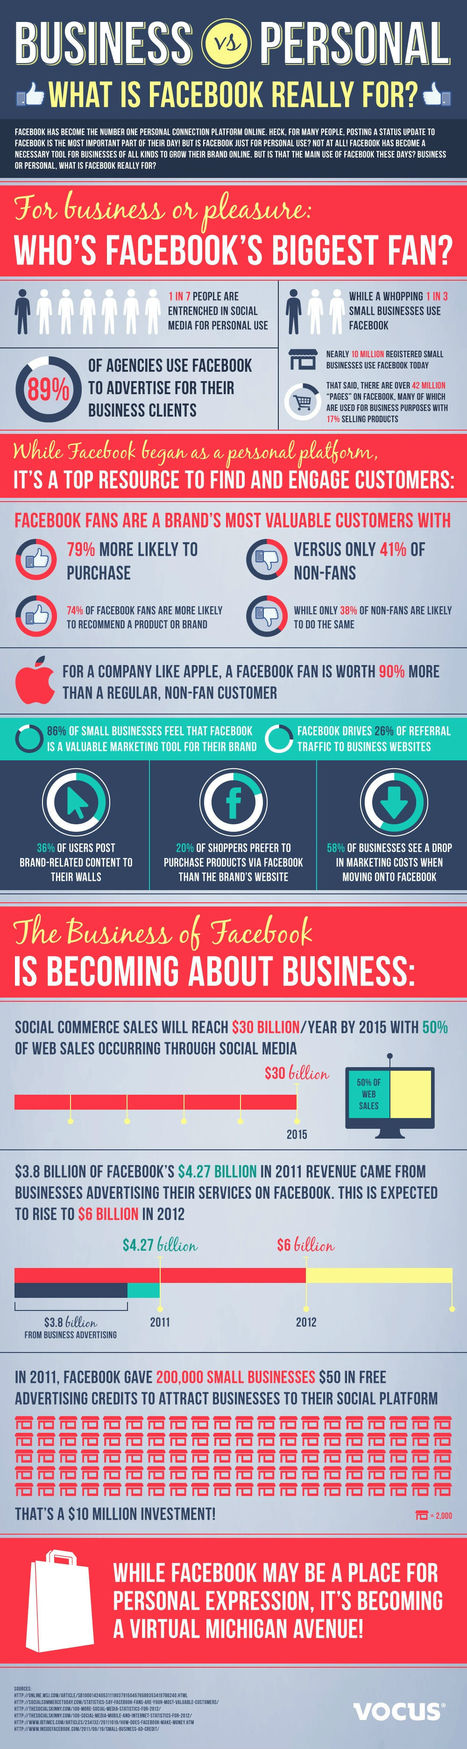 Why Sales on Social Media Will Be Huge By 2015 [INFOGRAPHIC] | MarketingHits | Scoop.it